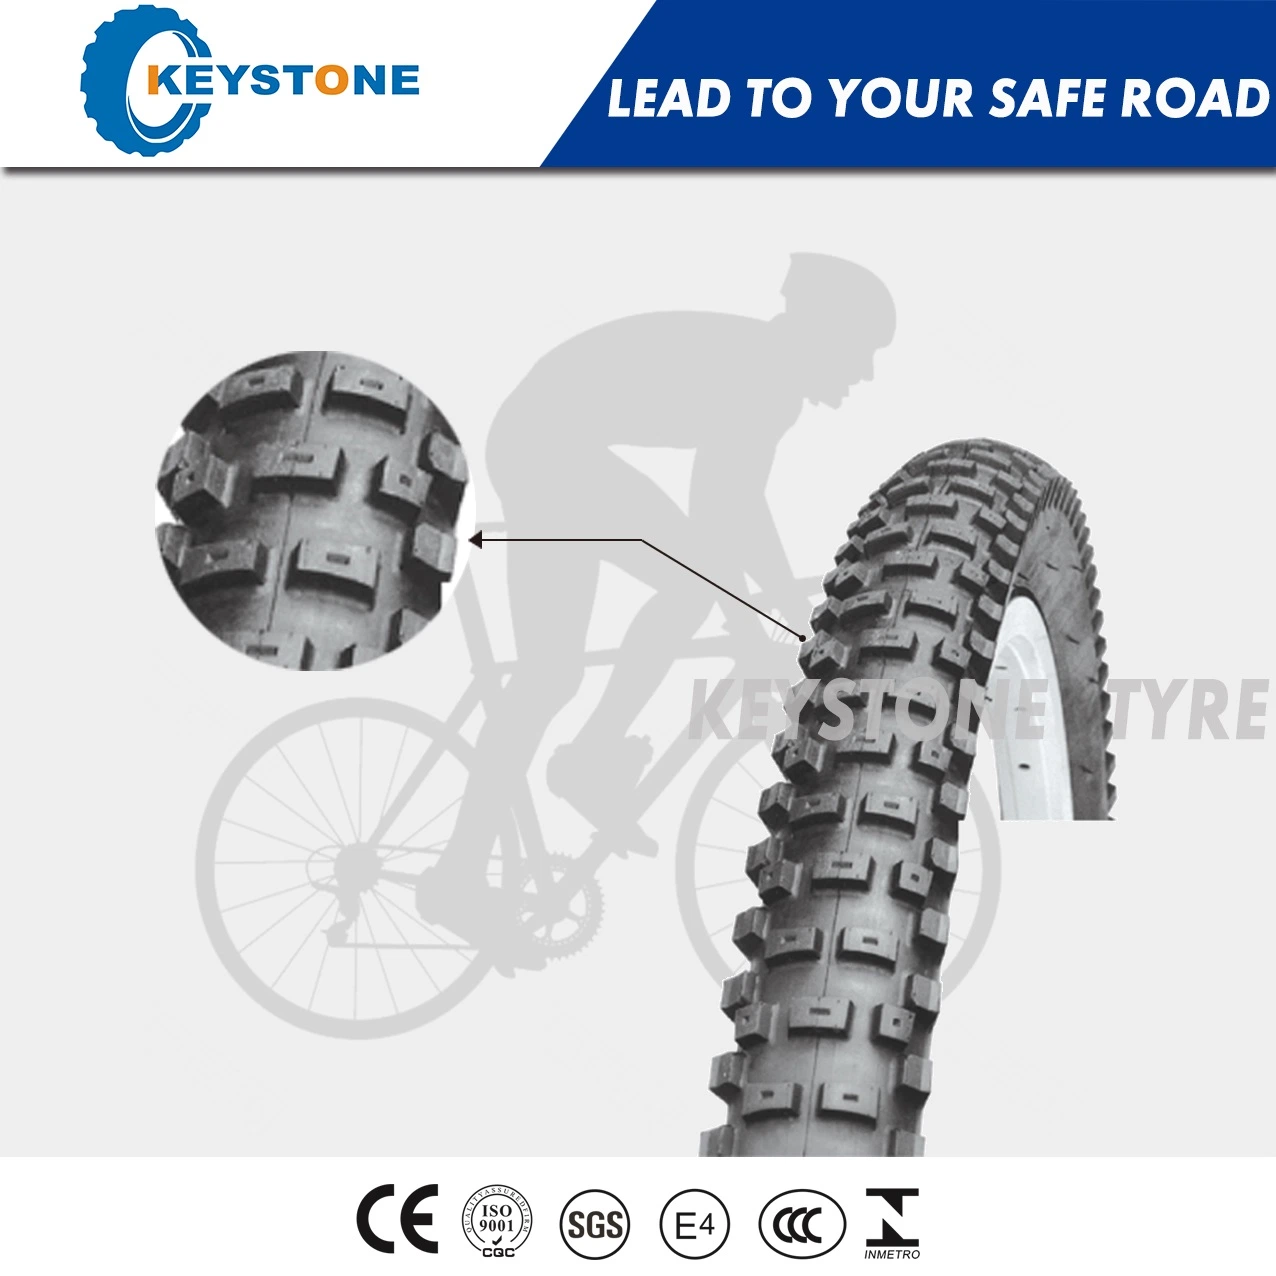 E-MARK Certificated High Quality MTB Bicycle Tire and Bicycle Parts (200X50, 24X2.35, 24X2.30, 26X2.30, 26X2.35)